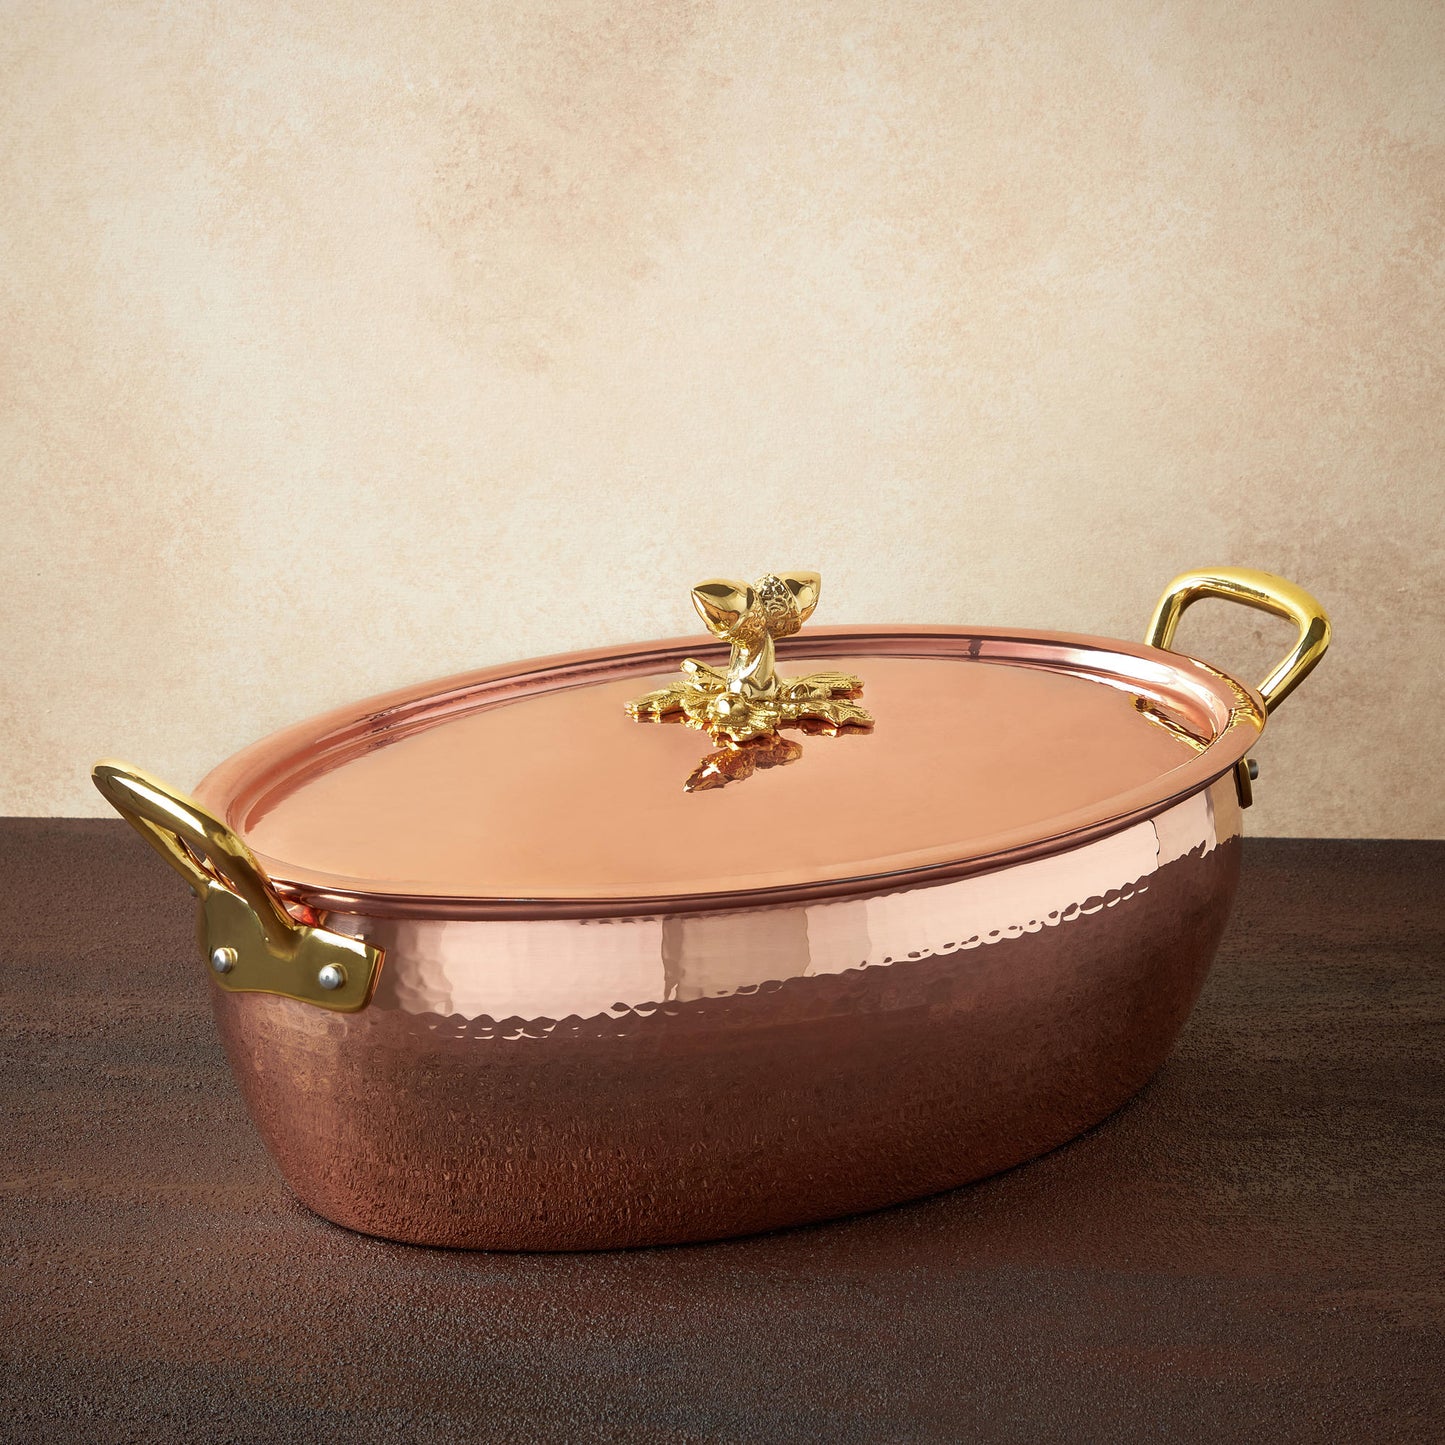 Hammered copper 8.5Qt Oval Casserole lined with high purity tin applied by hand over fire and bronze handles, from Ruffoni Historia collection